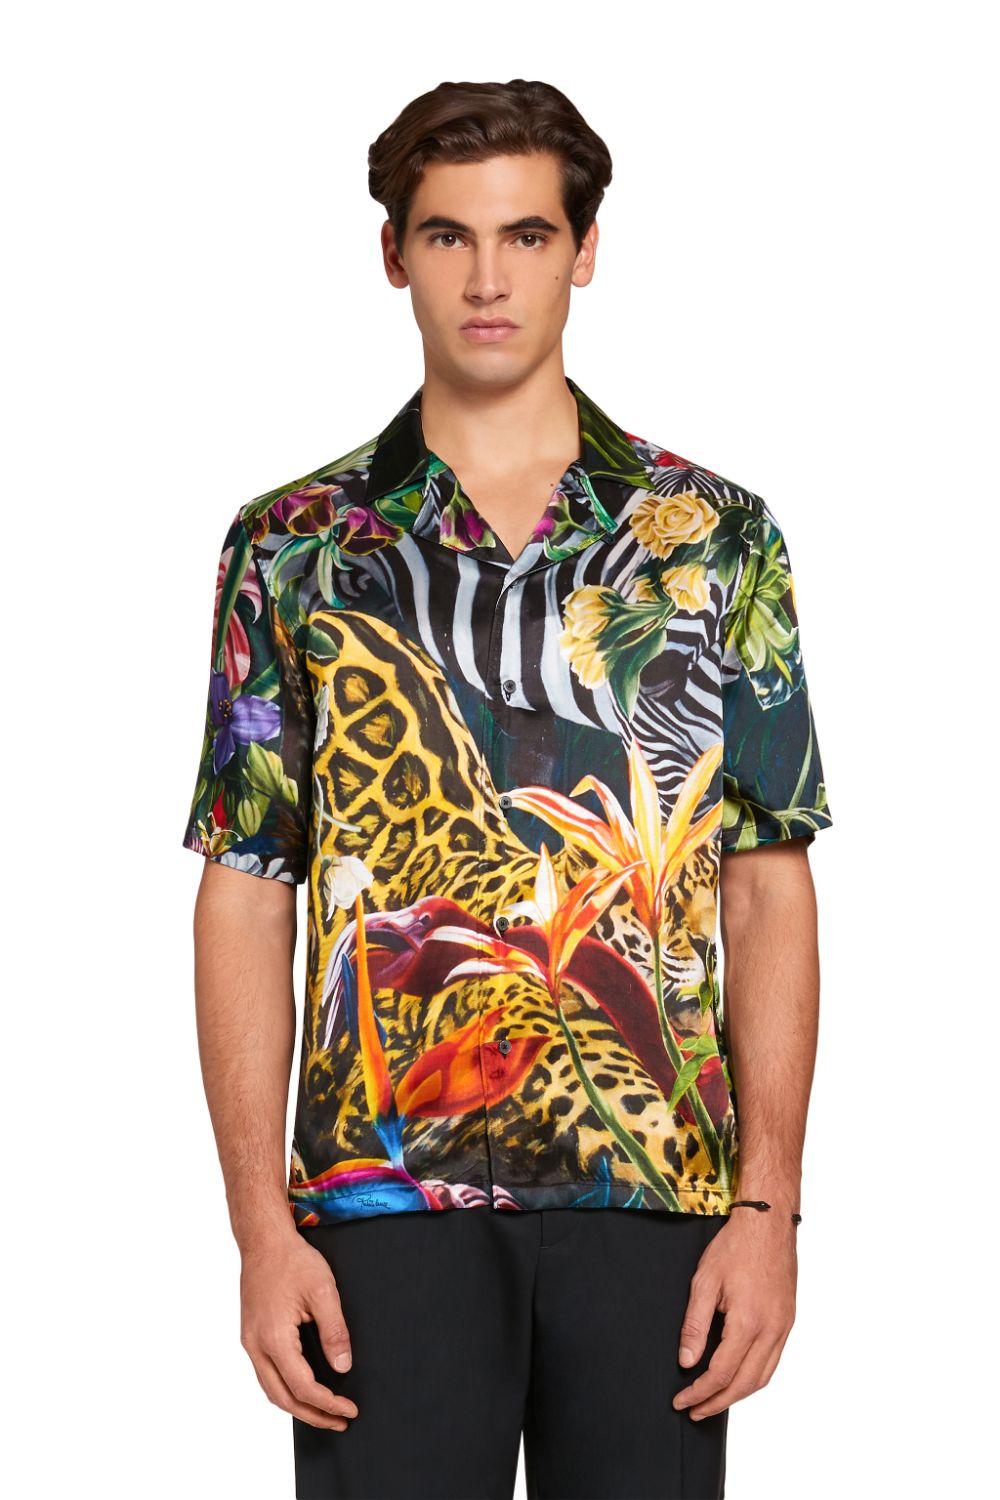 Roberto Cavalli Synthetic Paradise Found Print Bowling Shirt for Men - Lyst